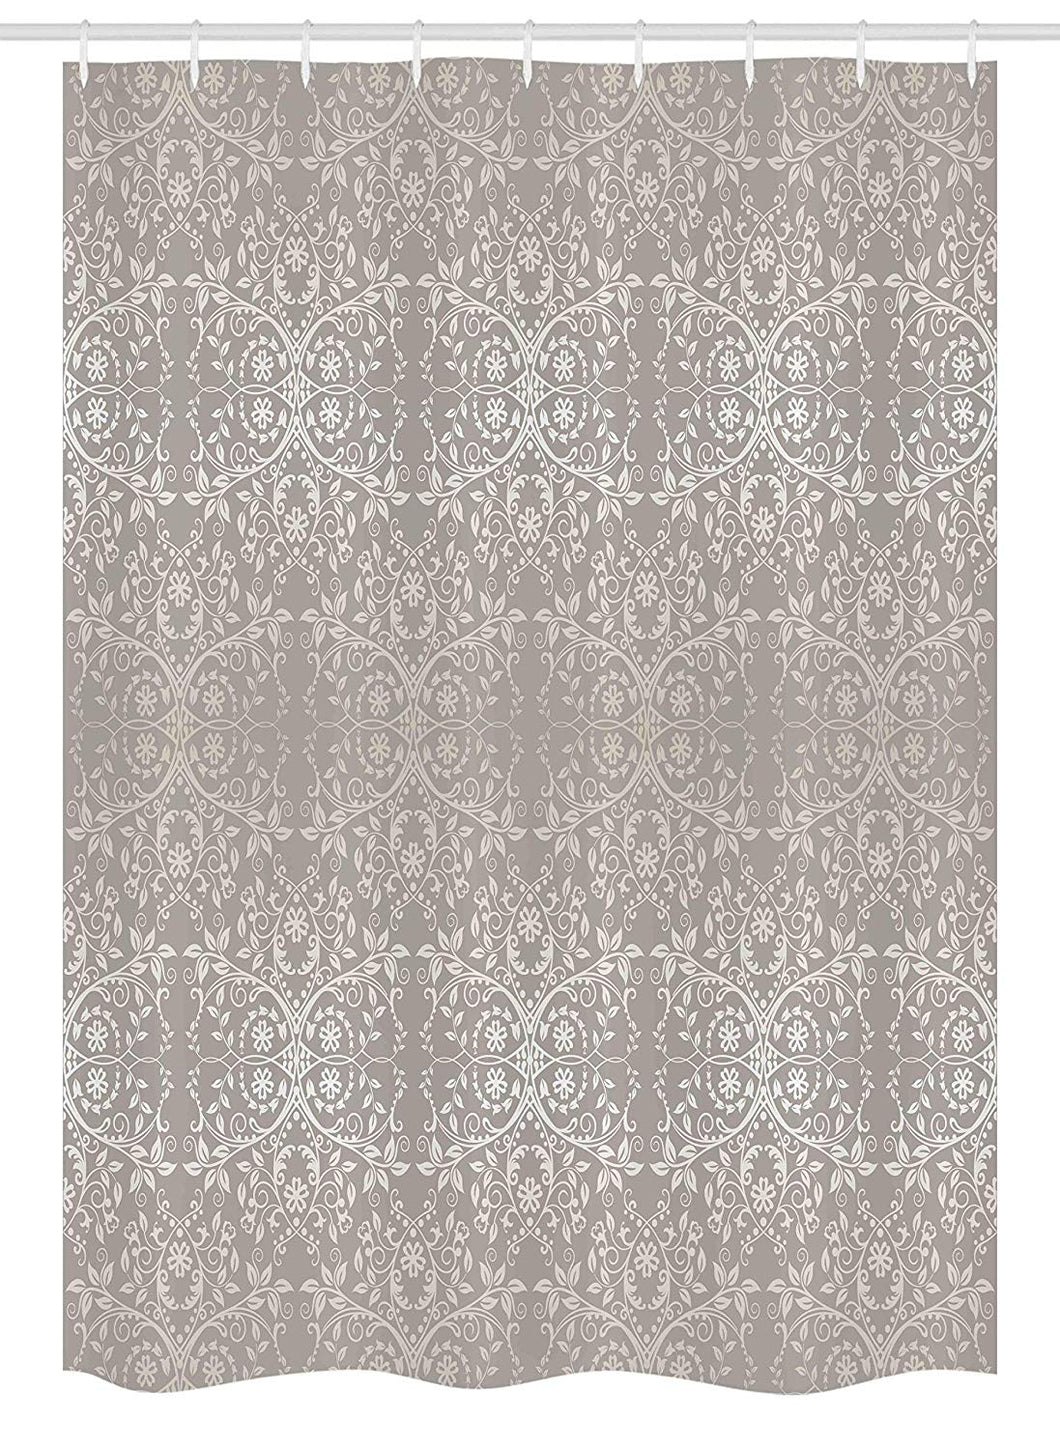 Ambesonne Grey Stall Shower Curtain, Victorian Lace Flowers and Leaves Retro Background Old Fashioned Graphic Print, Fabric Bathroom Decor Set with Hooks, 54 W x 78 L Inches, Warm Taupe Beige